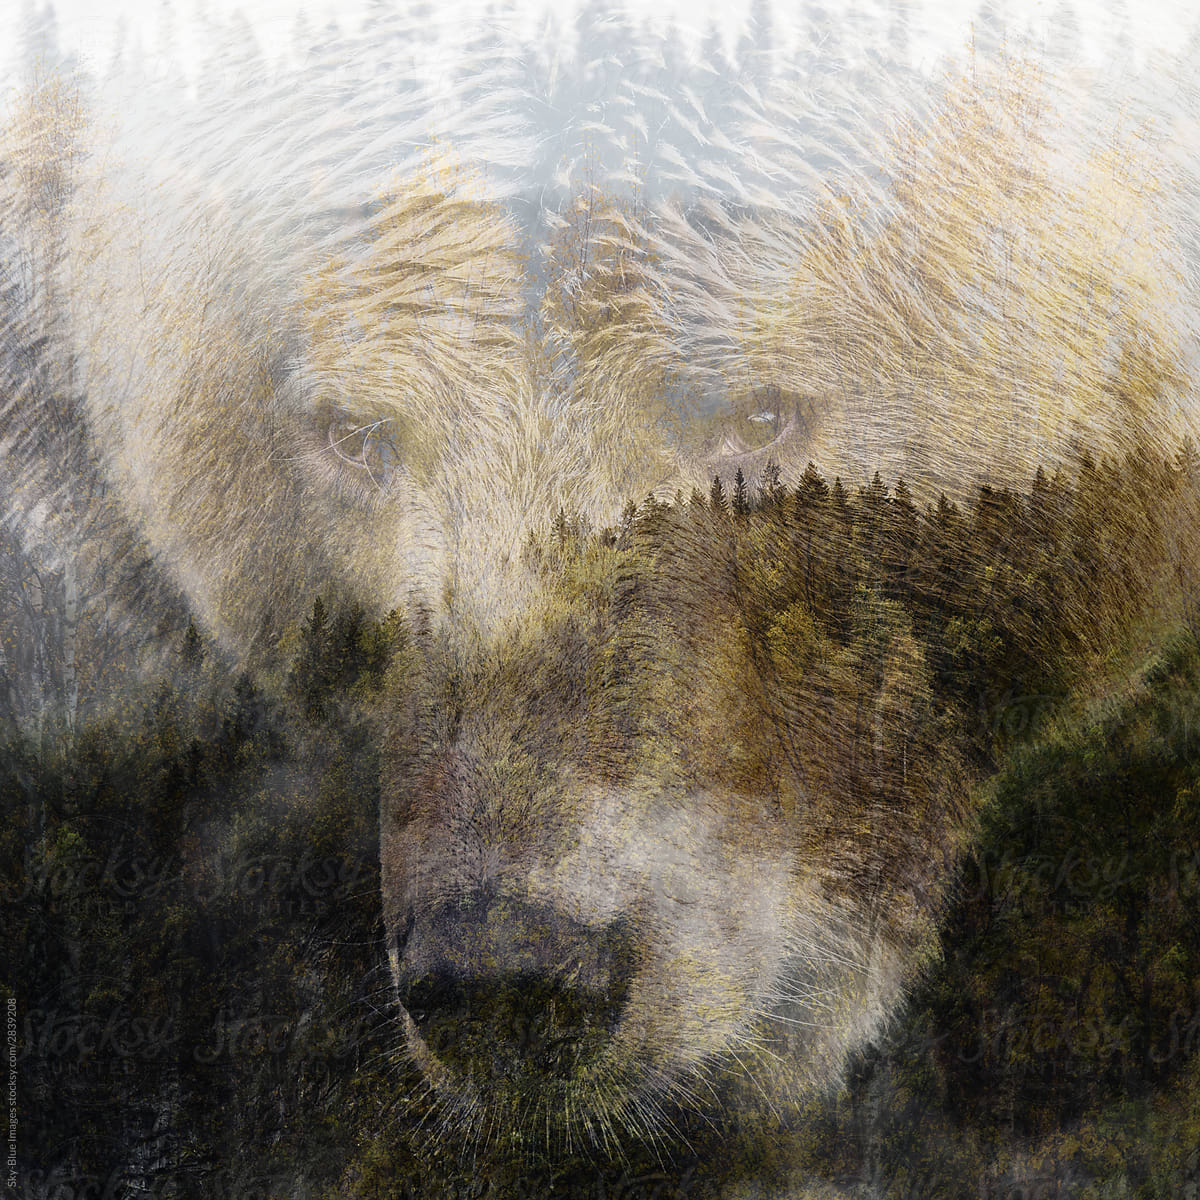 Multiple exposures of forest animals: Bear